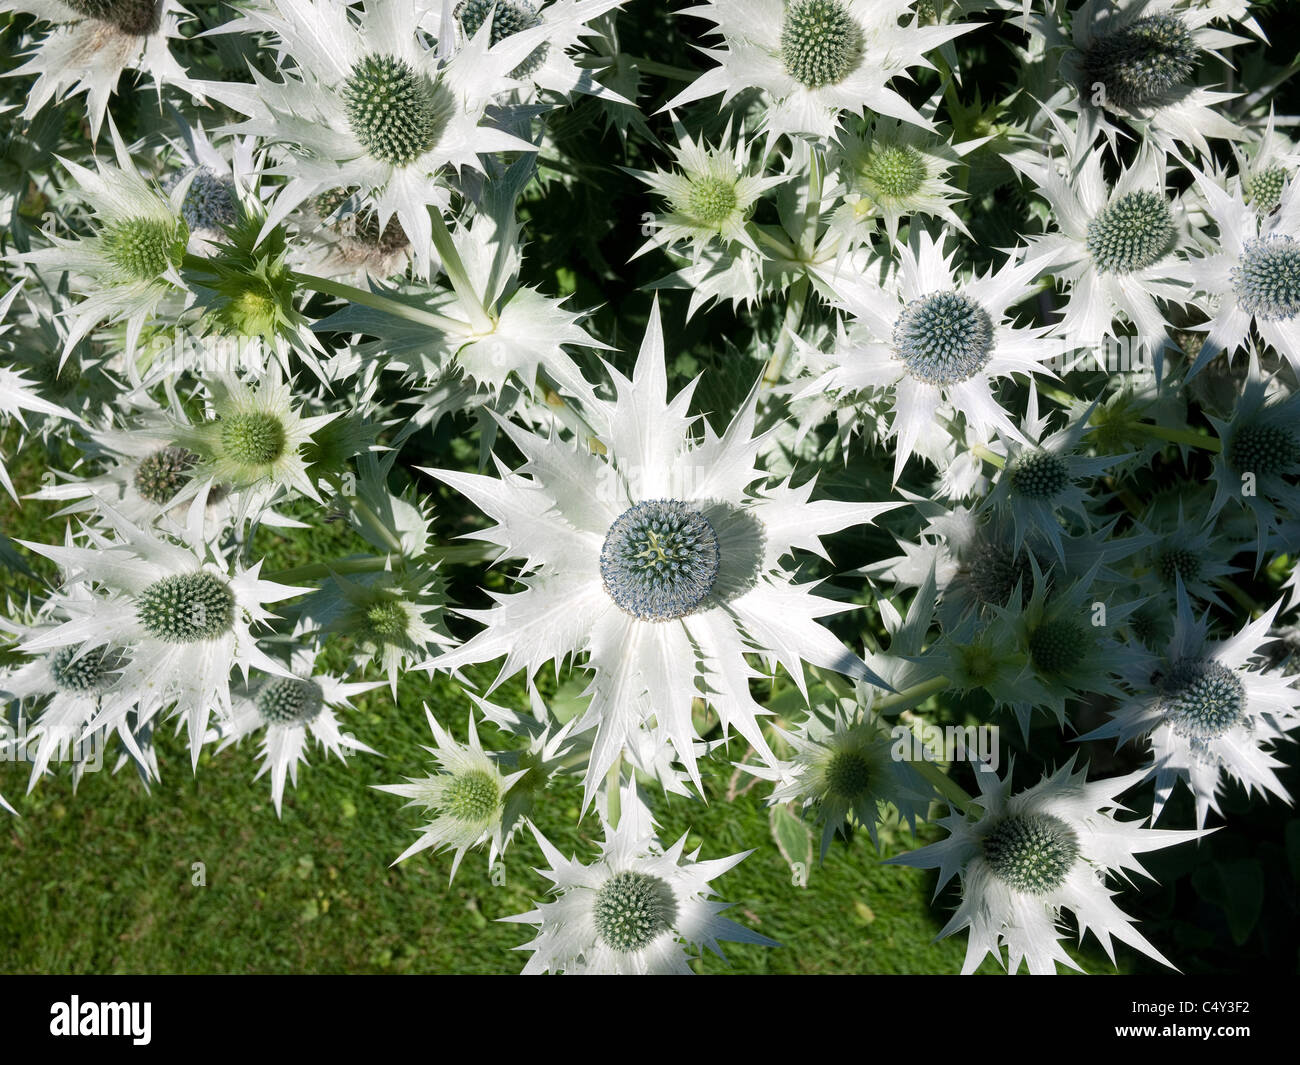 sea holly type of thistle in garden Stock Photo